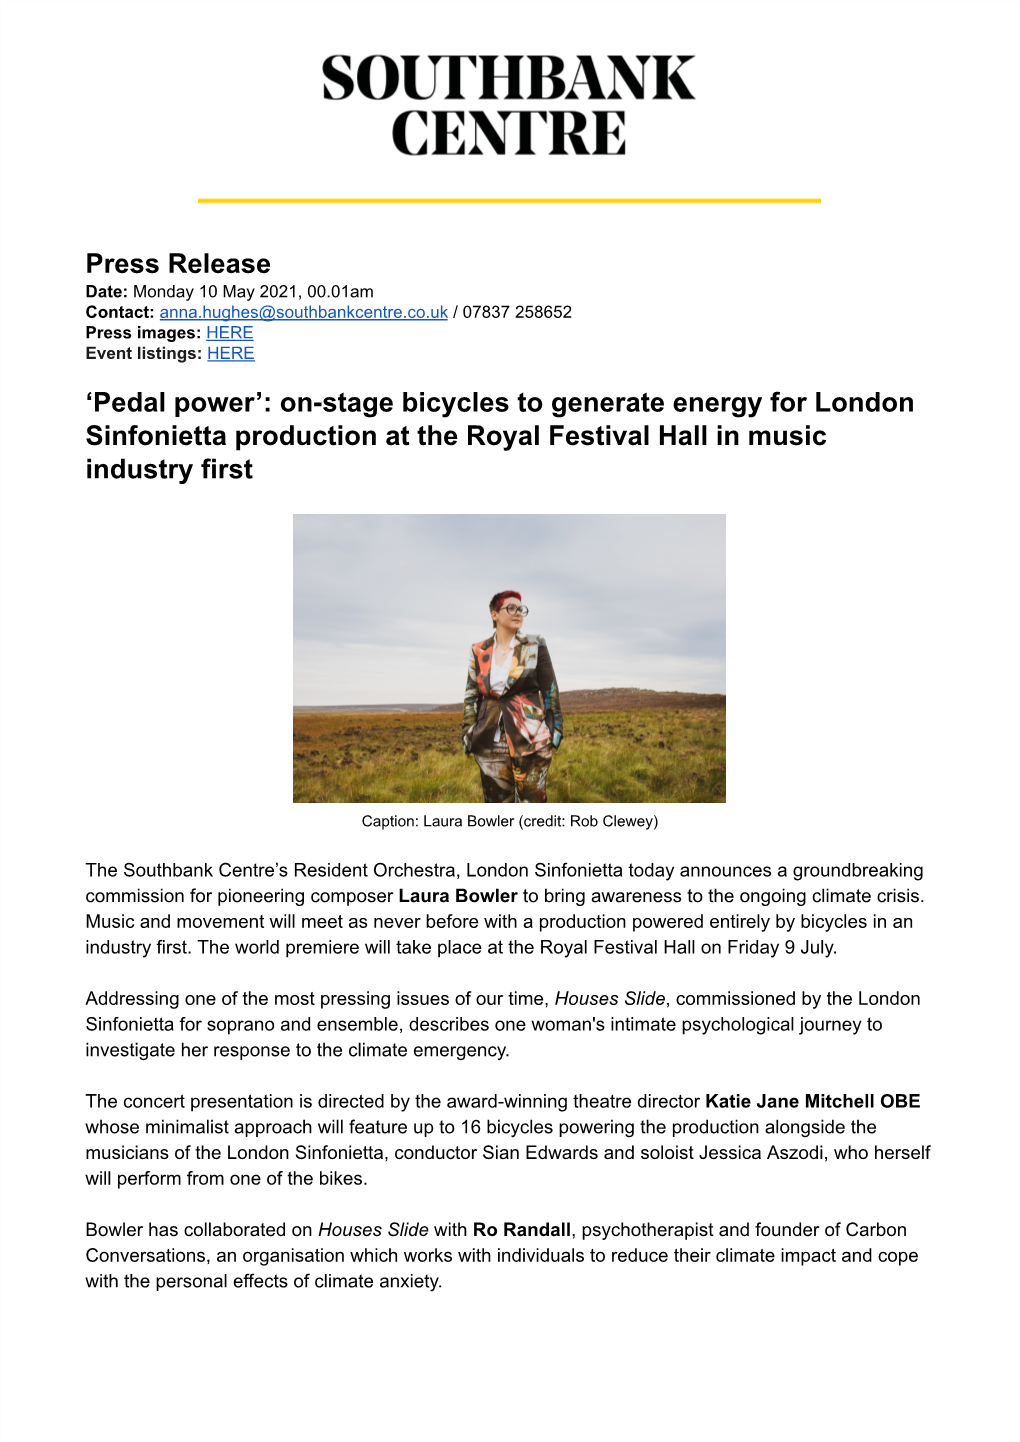 'Pedal Power': On-Stage Bicycles to Generate Energy for London